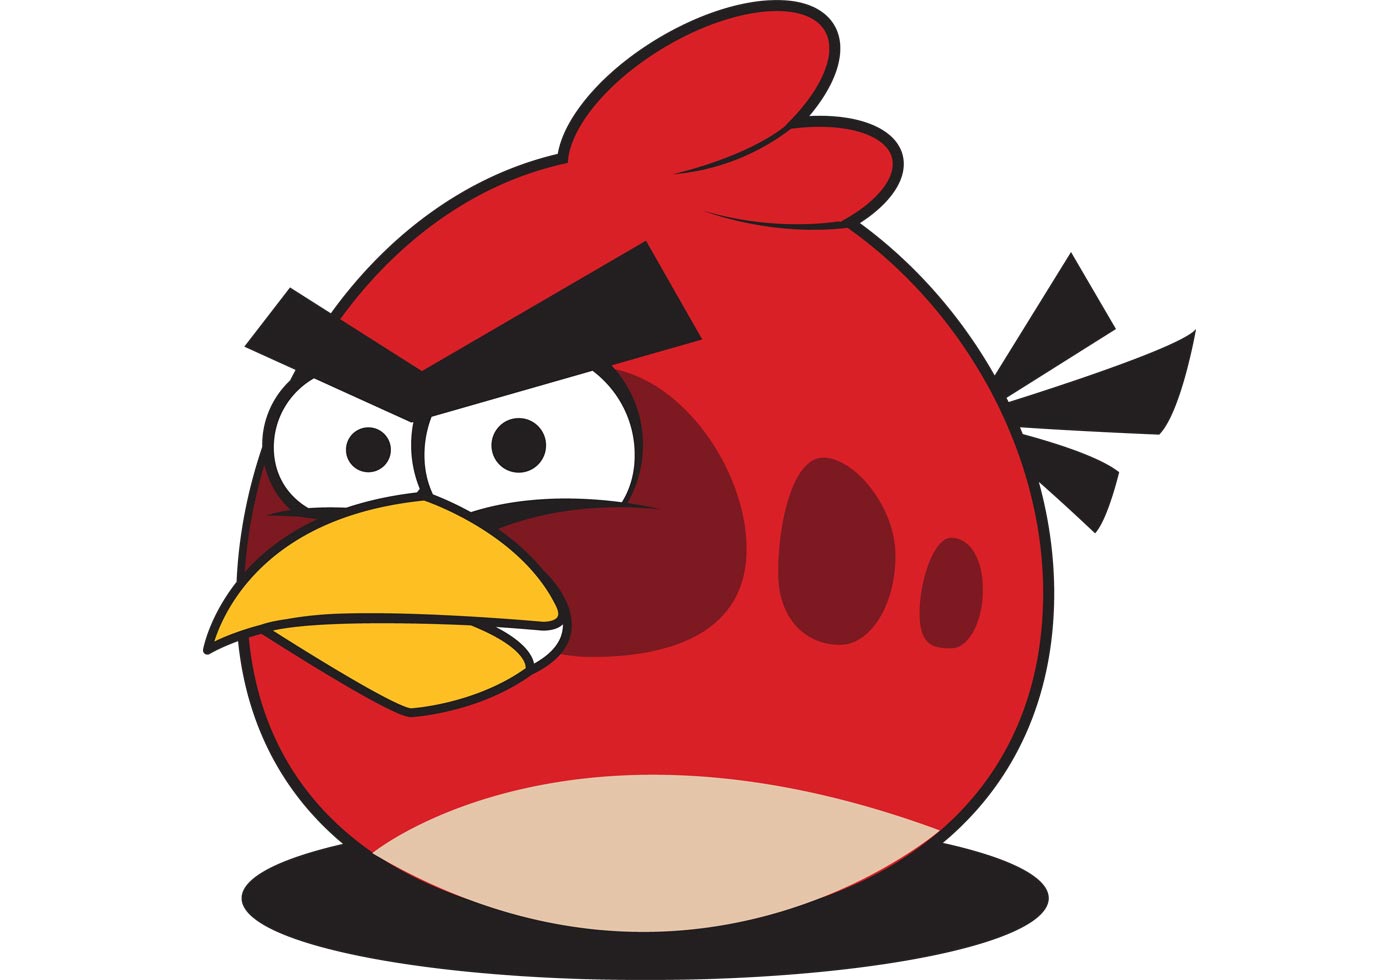 Red angry bird vector